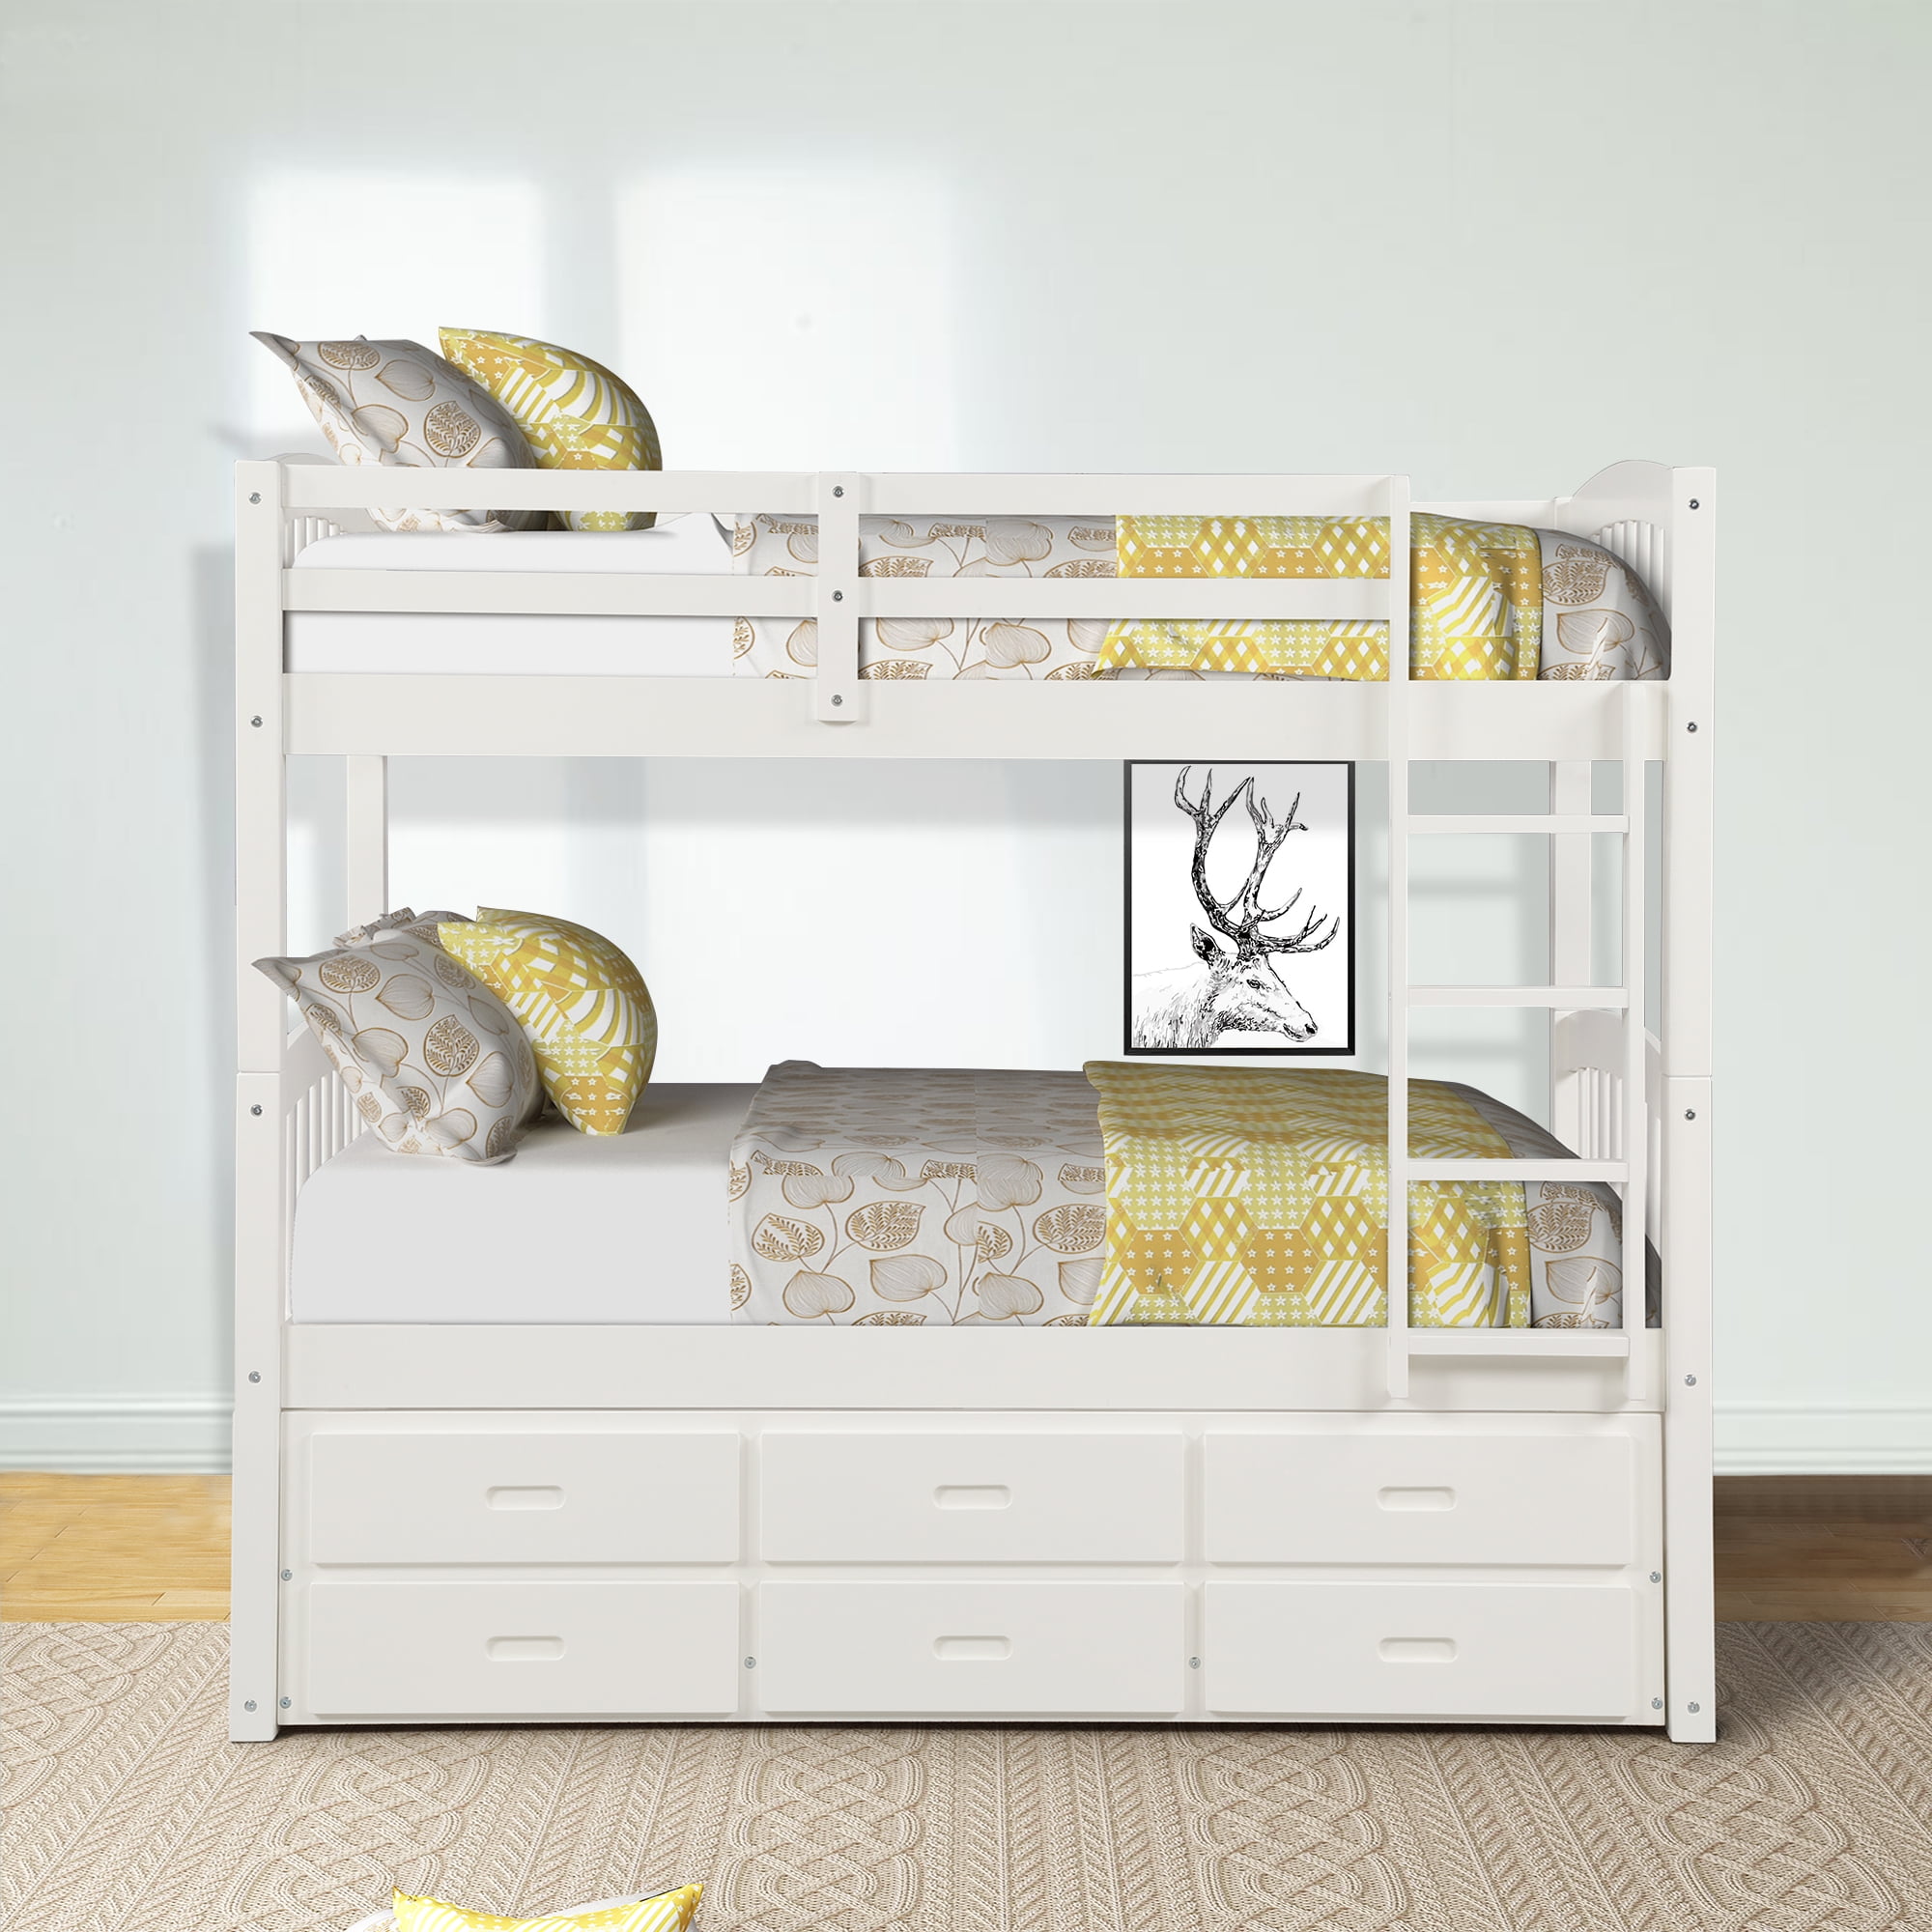 Twin Over Bunk Bed For Kids 79 5, Space Saving Twin Bunk Beds